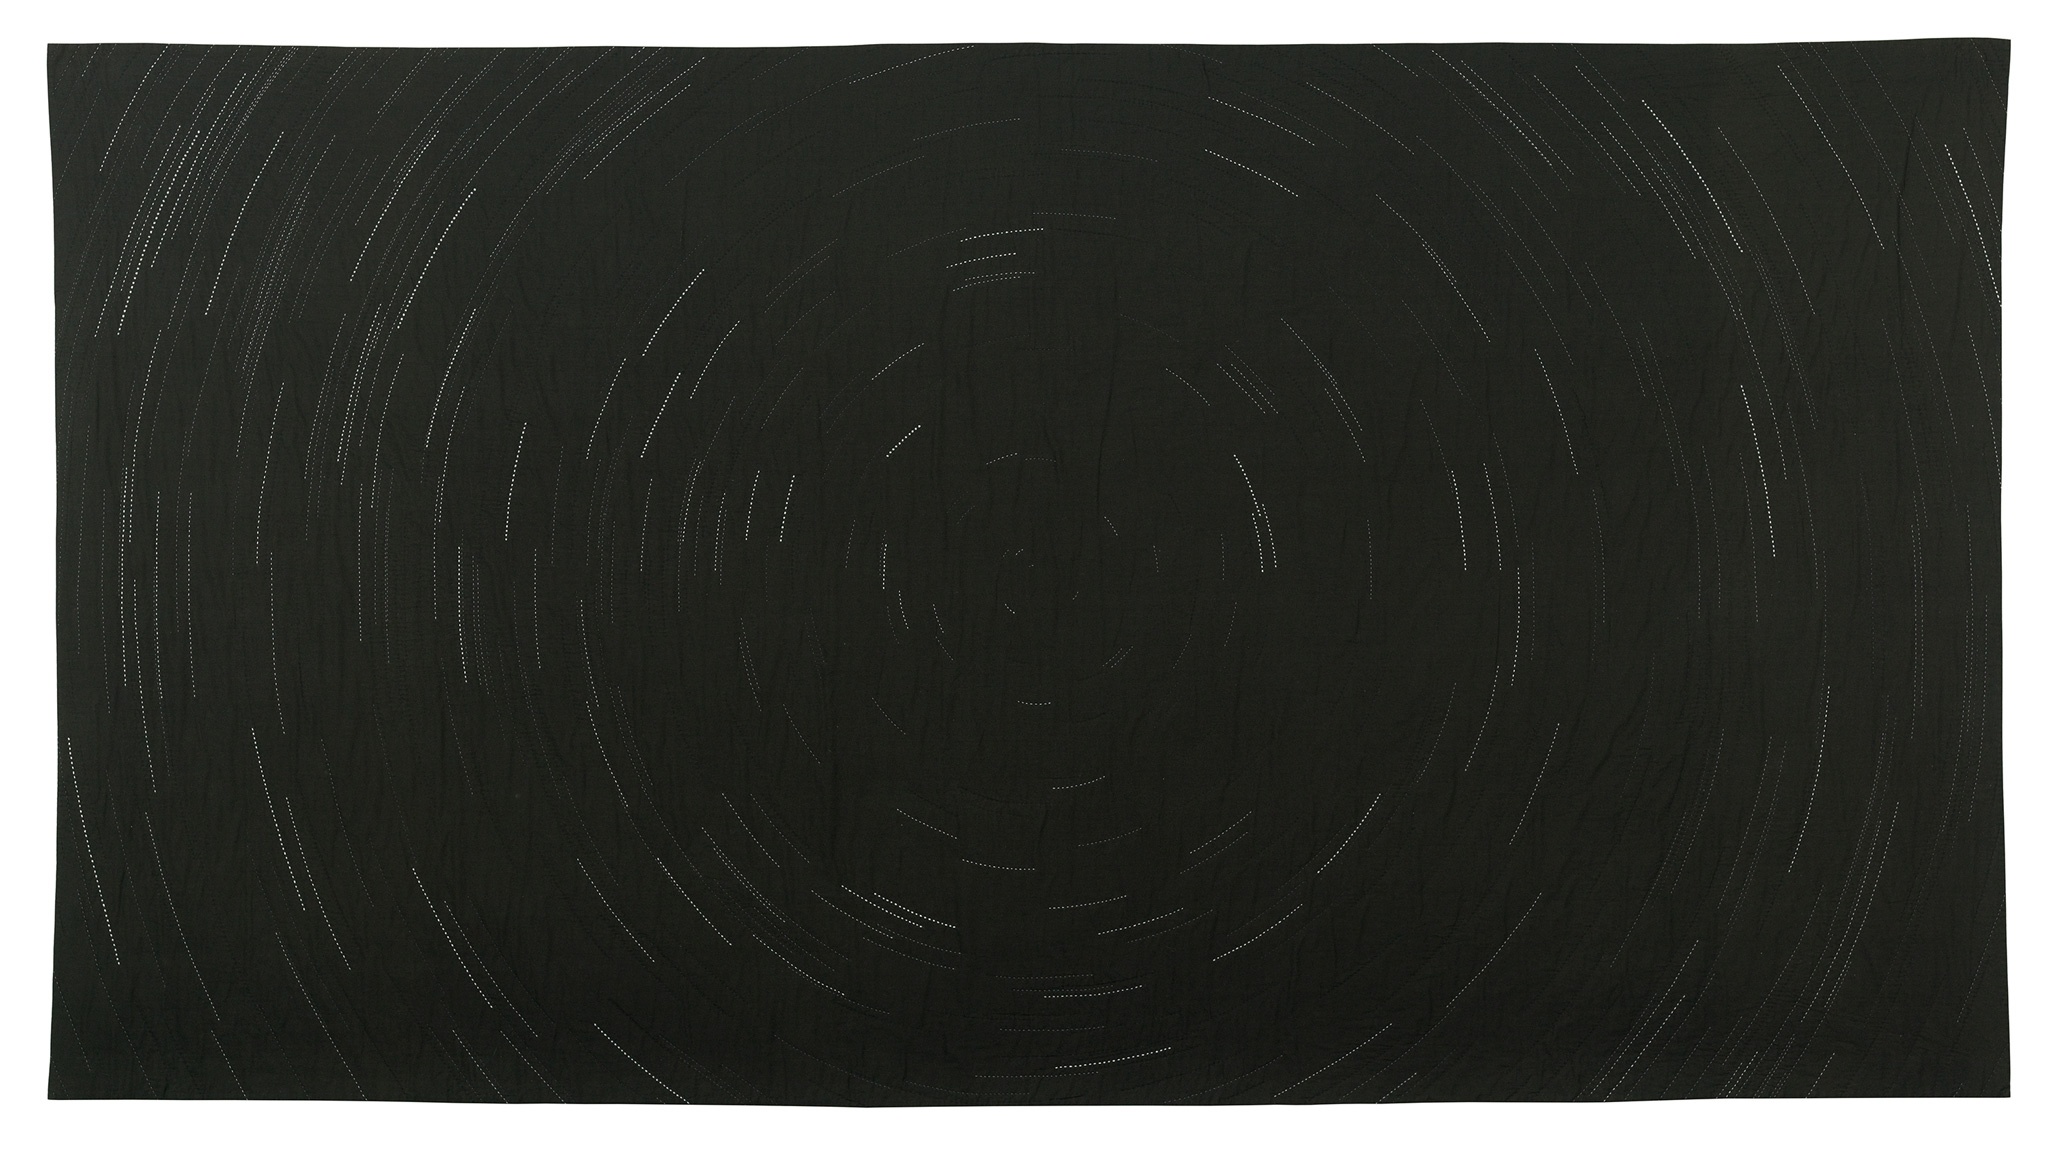 Against a black background are faint white and gray lines forming broken concentric circles that imply movement through space.